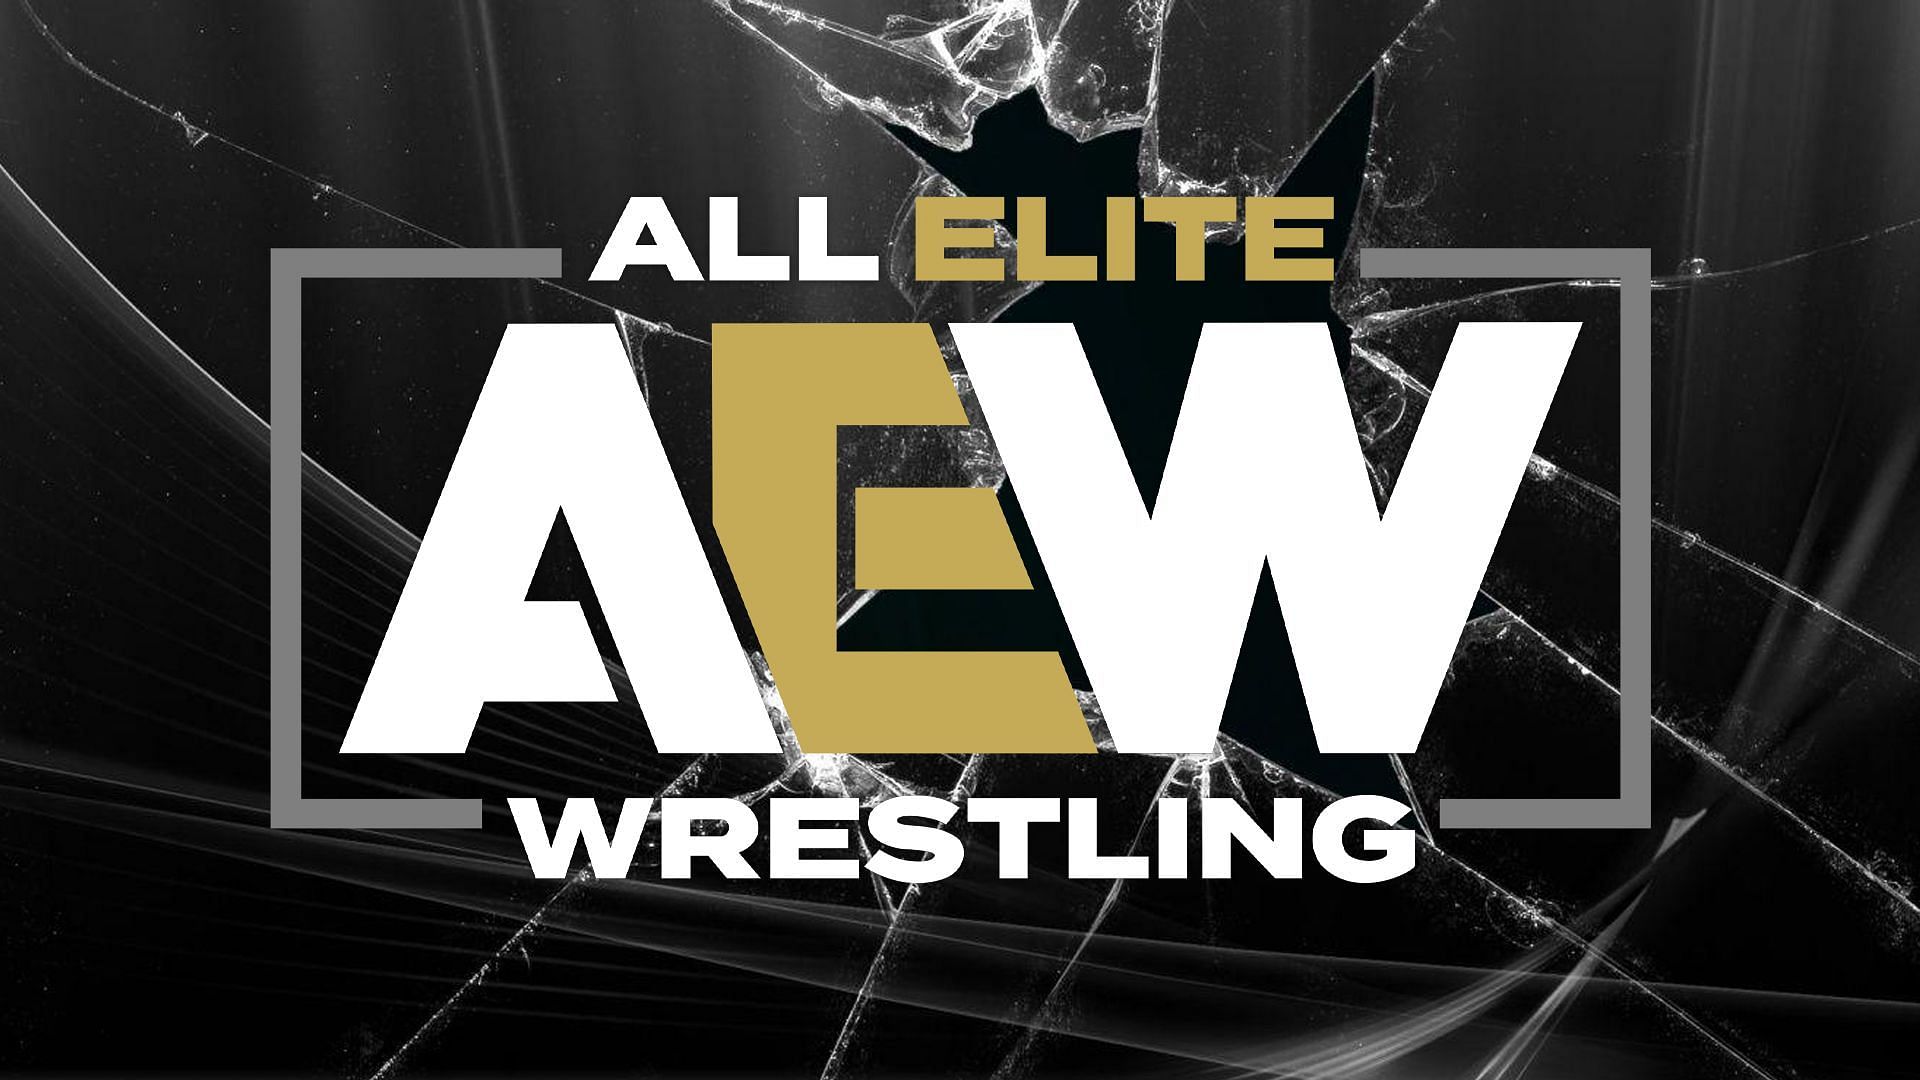 AEW has struggled to move tickets lately for a variety of reasons